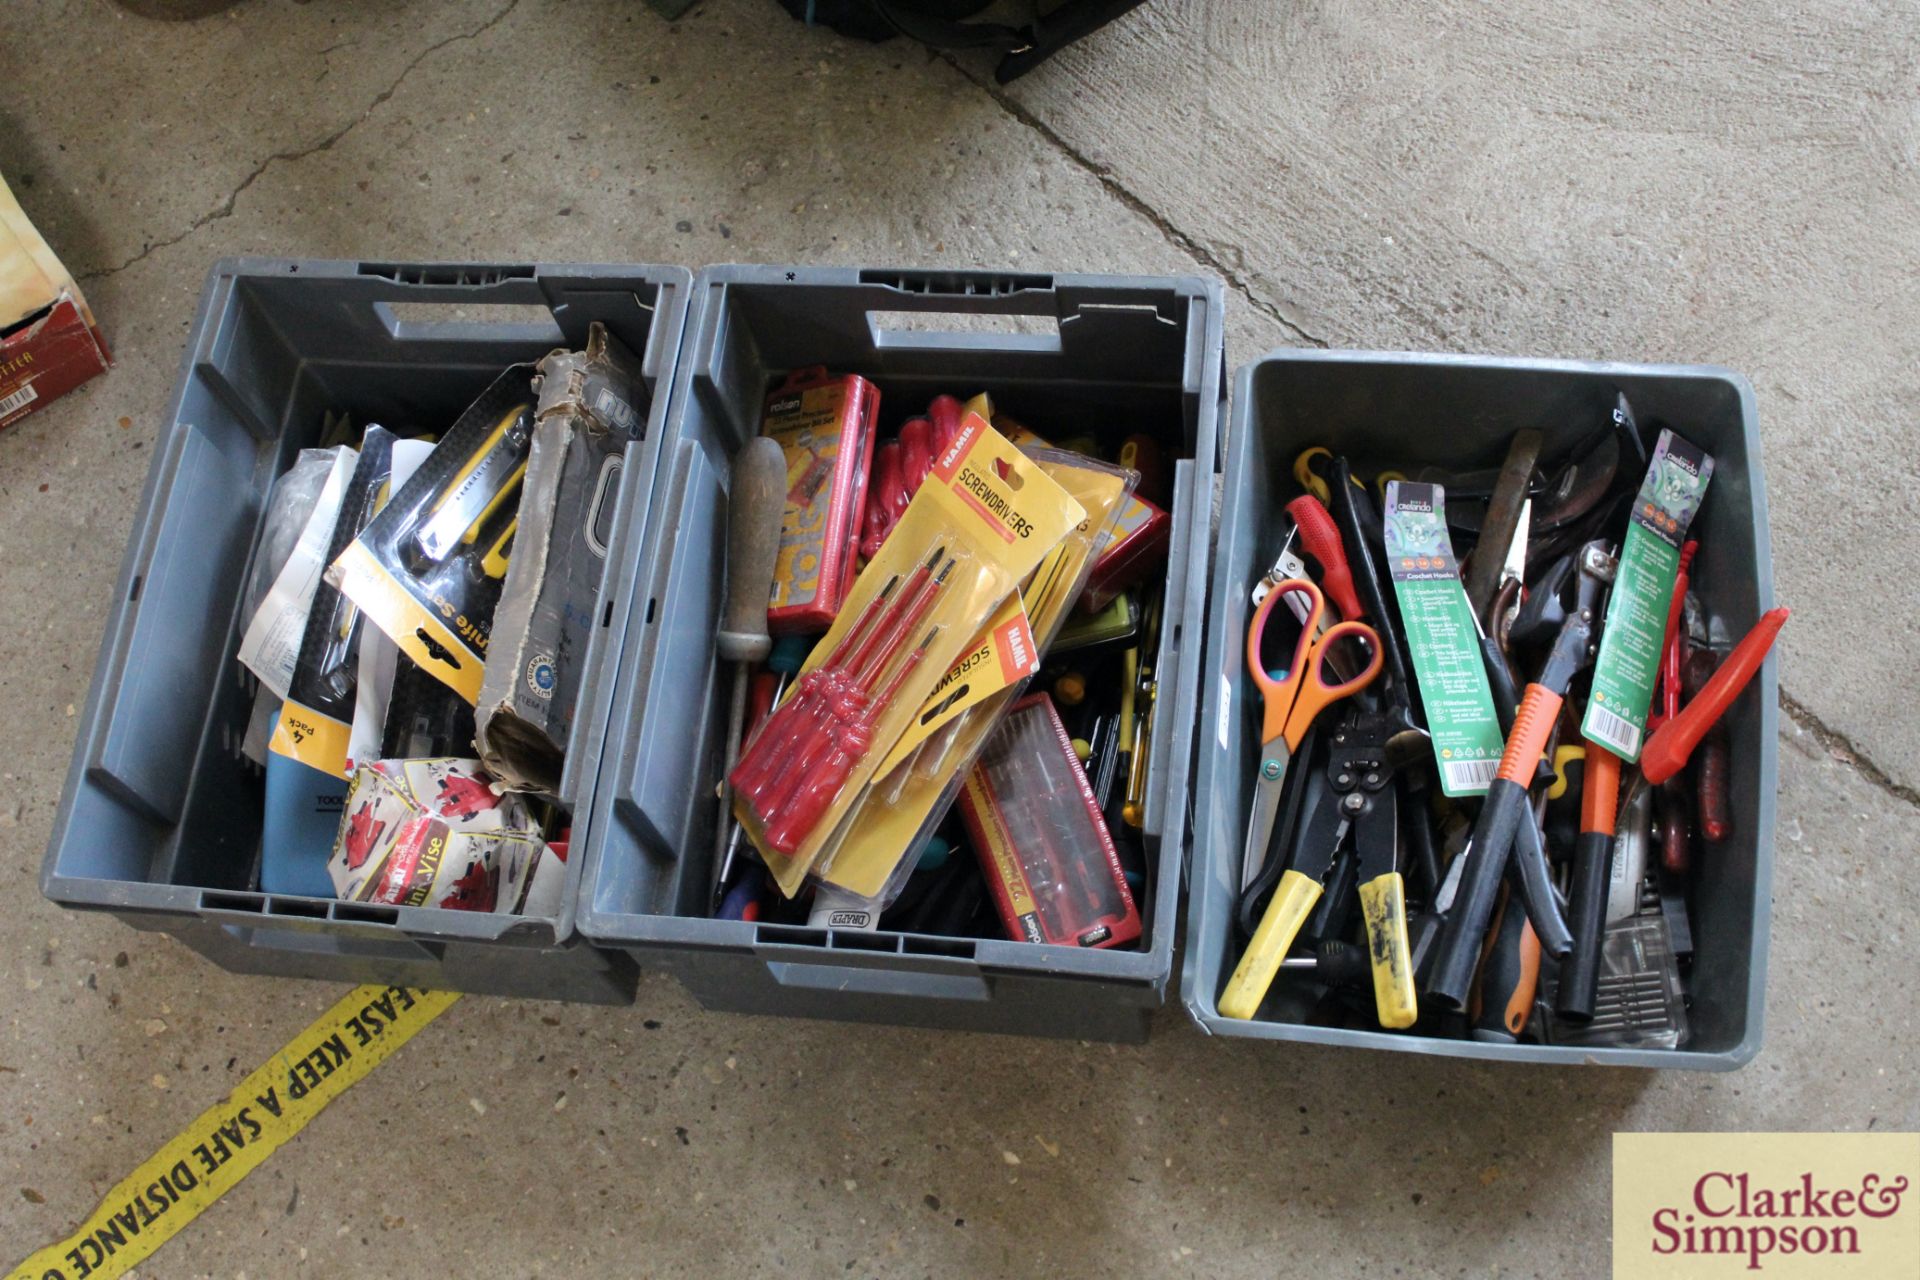 3x trays of hand tools.